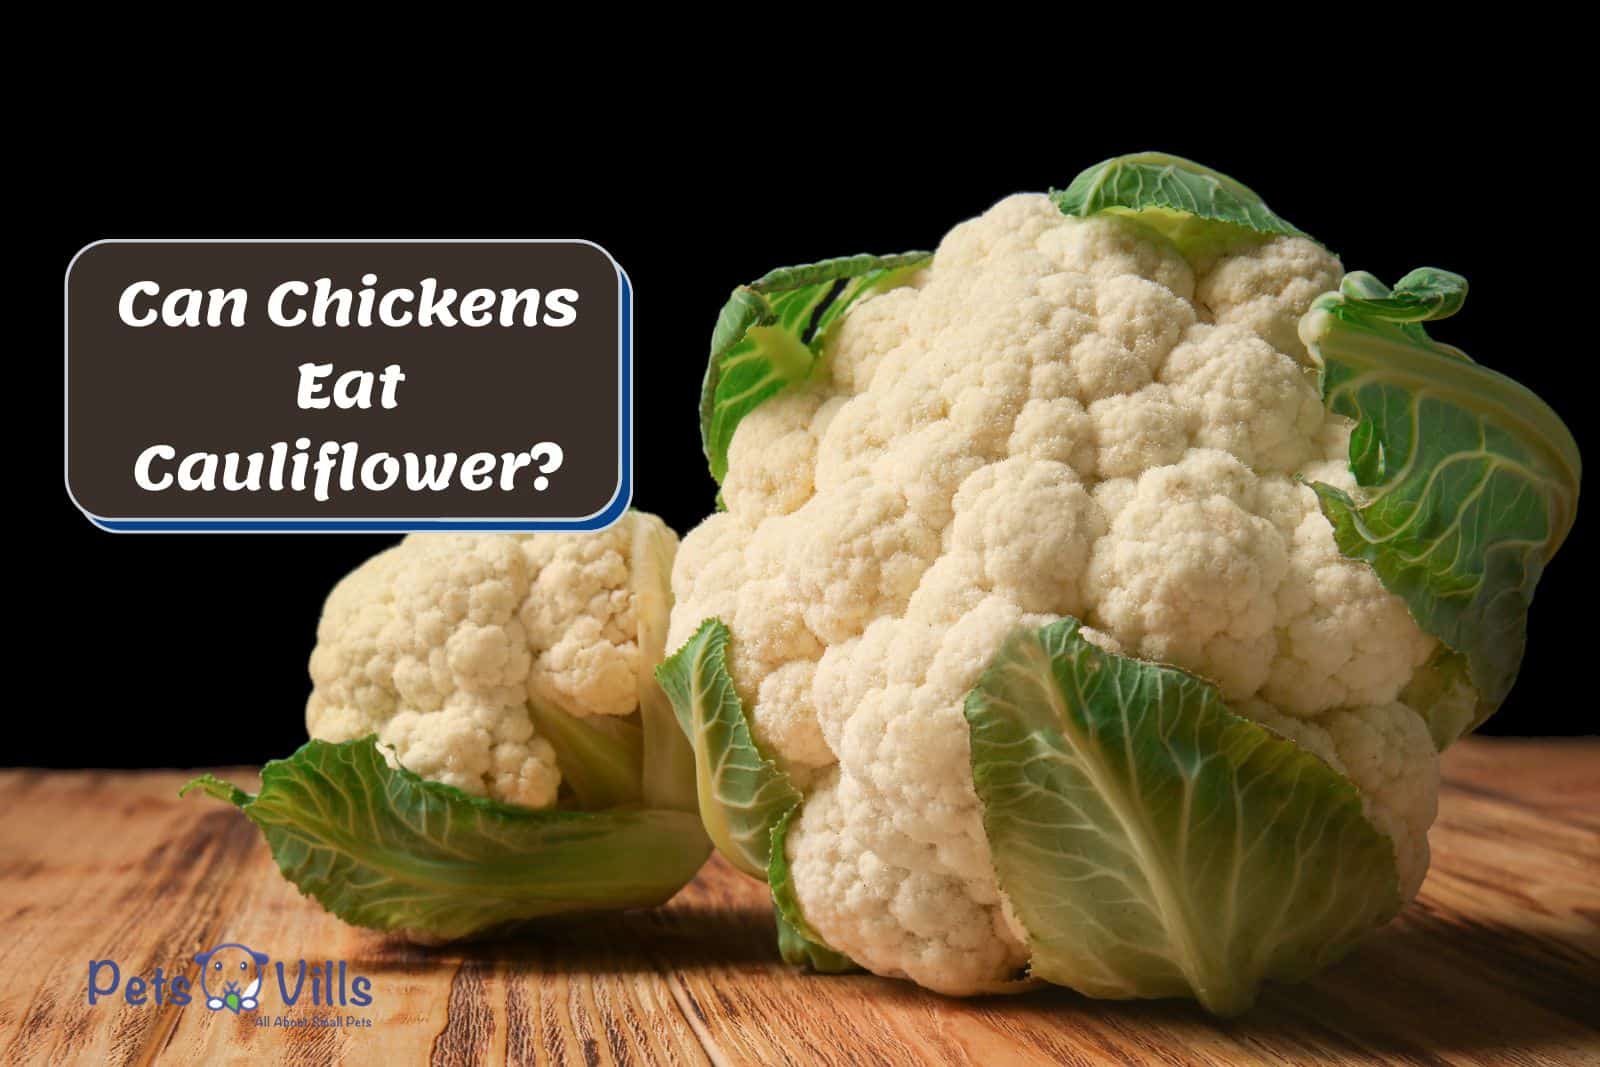 cauliflowers on a wooden table so Can Chickens Eat Cauliflower?